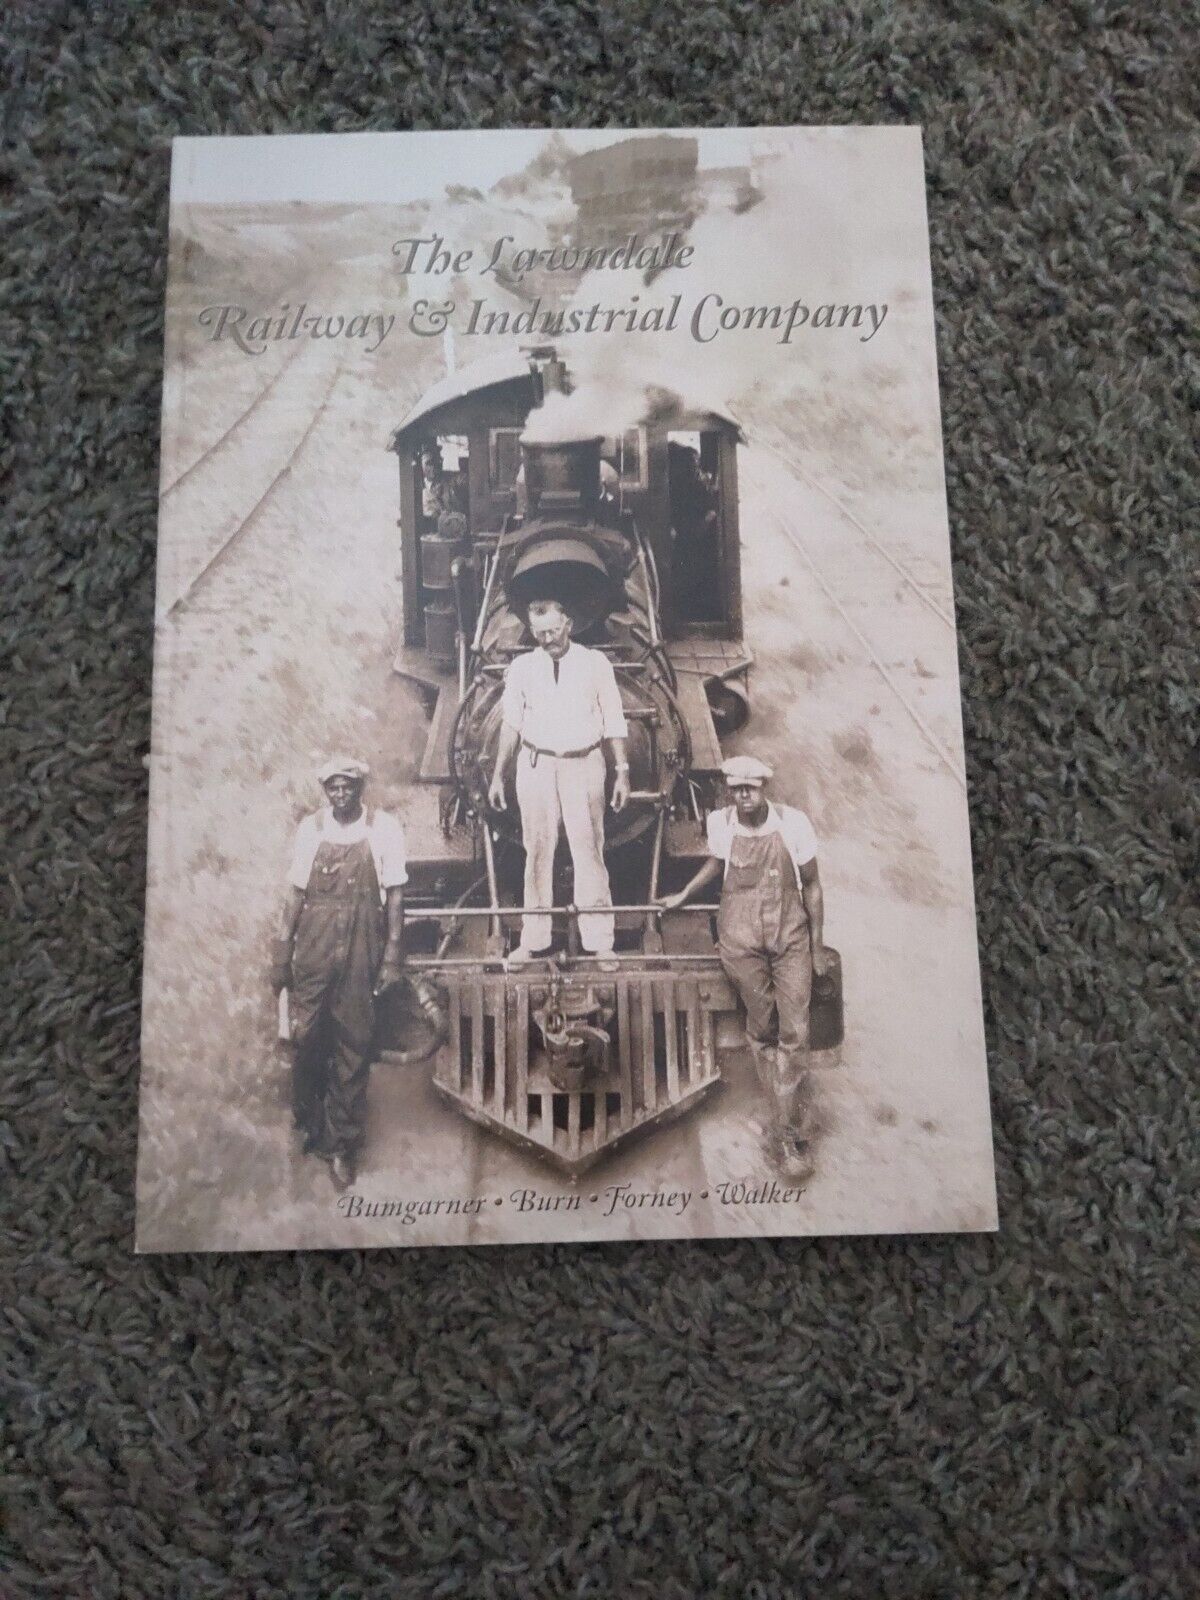 The Lawndale Railway & Industrial Company